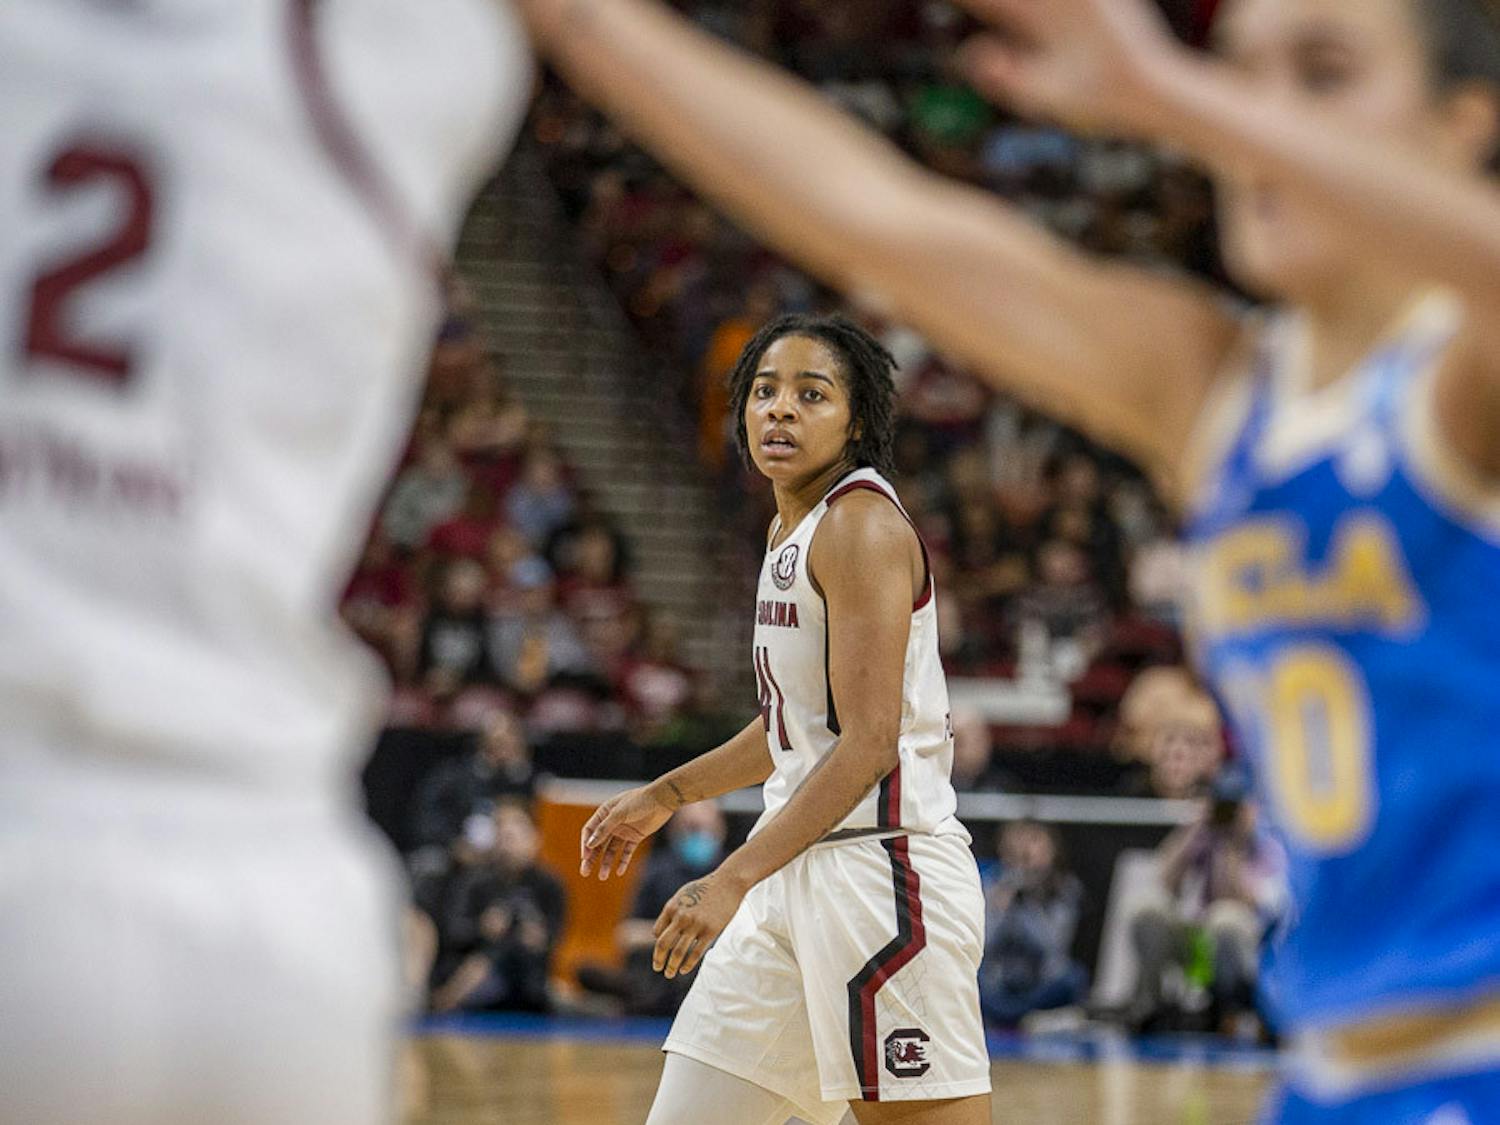 Freshman guard Talaysia Cooper watches the play during the match against UCLA at Bon Secours Wellness Arena in Greenville, South Carolina, on March 25, 2023. The Gamecocks beat the Bruins 59-43 and will move on to the Elite Eight tournament.